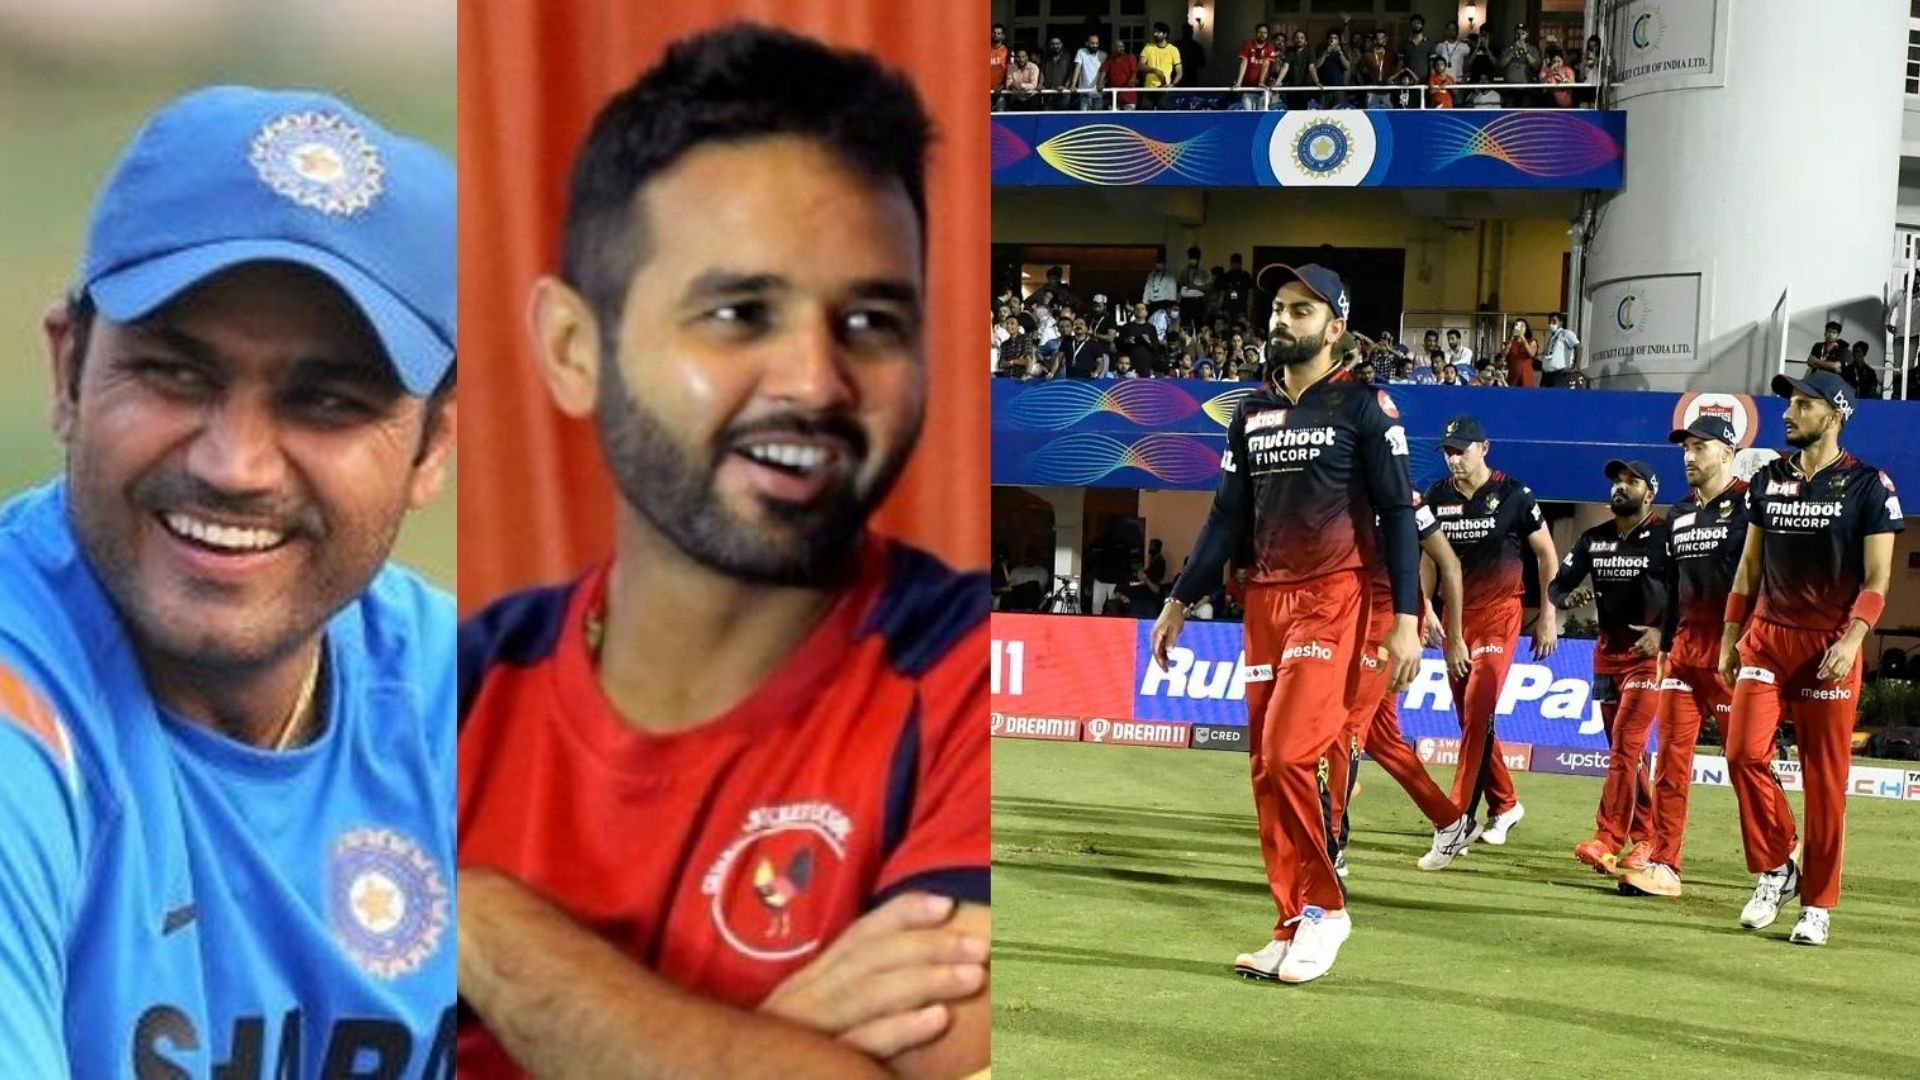 Virender Sehwag (L) and Parthiv Patel had a hilarious banter. (P.C.: Twitter &amp; iplt20.com)